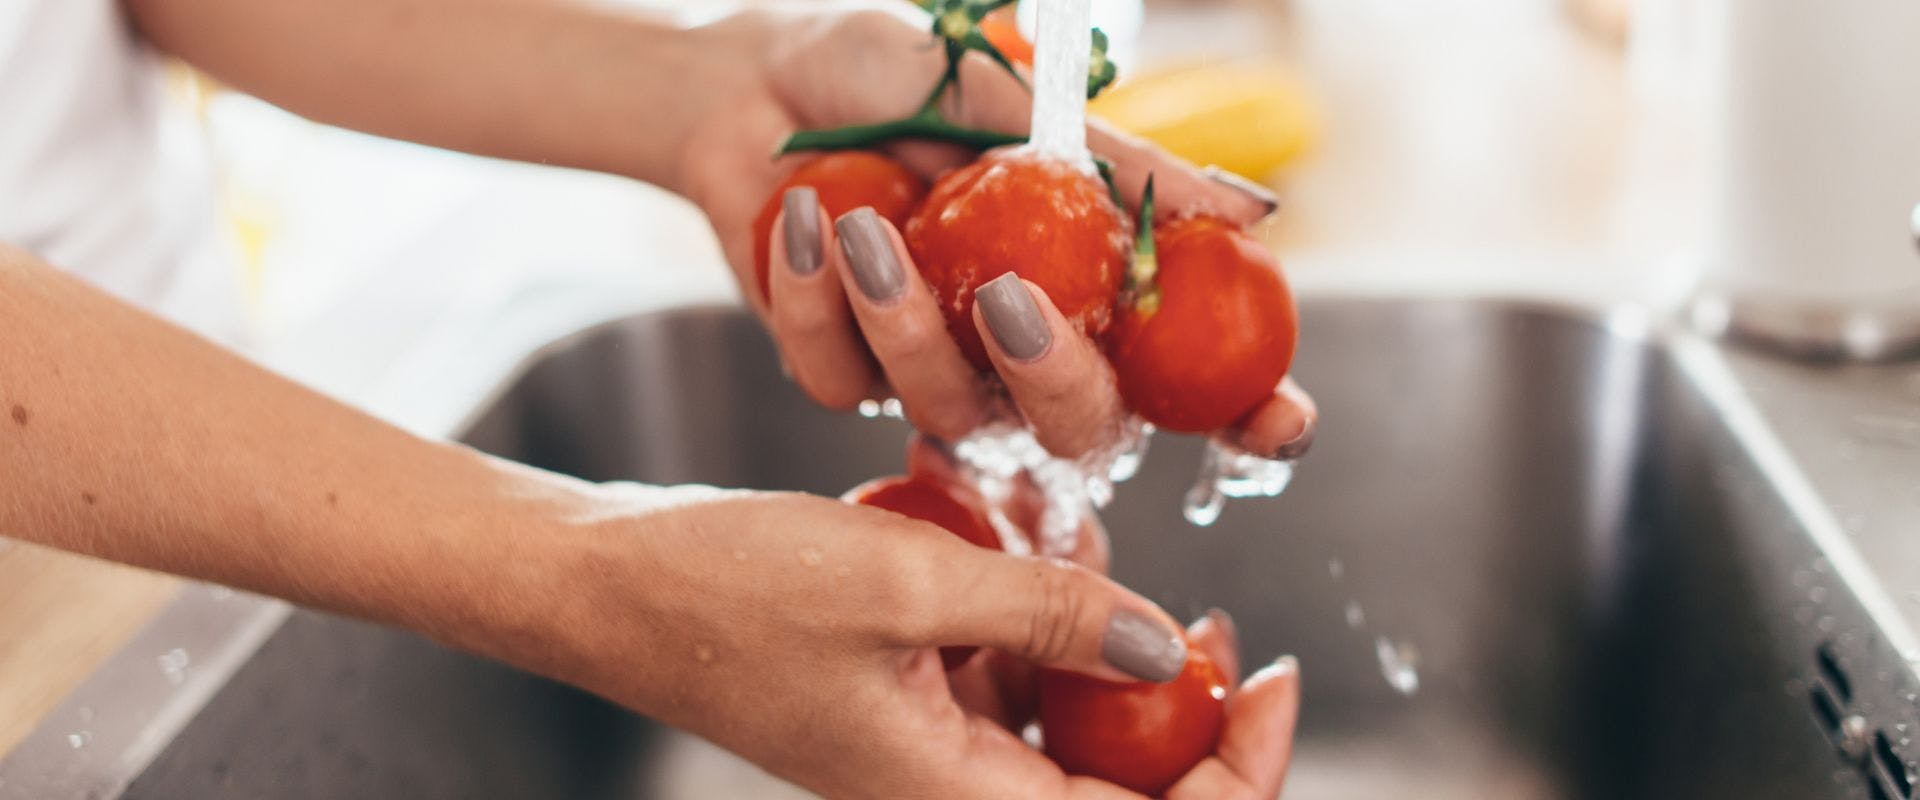 Person washing tomatoes